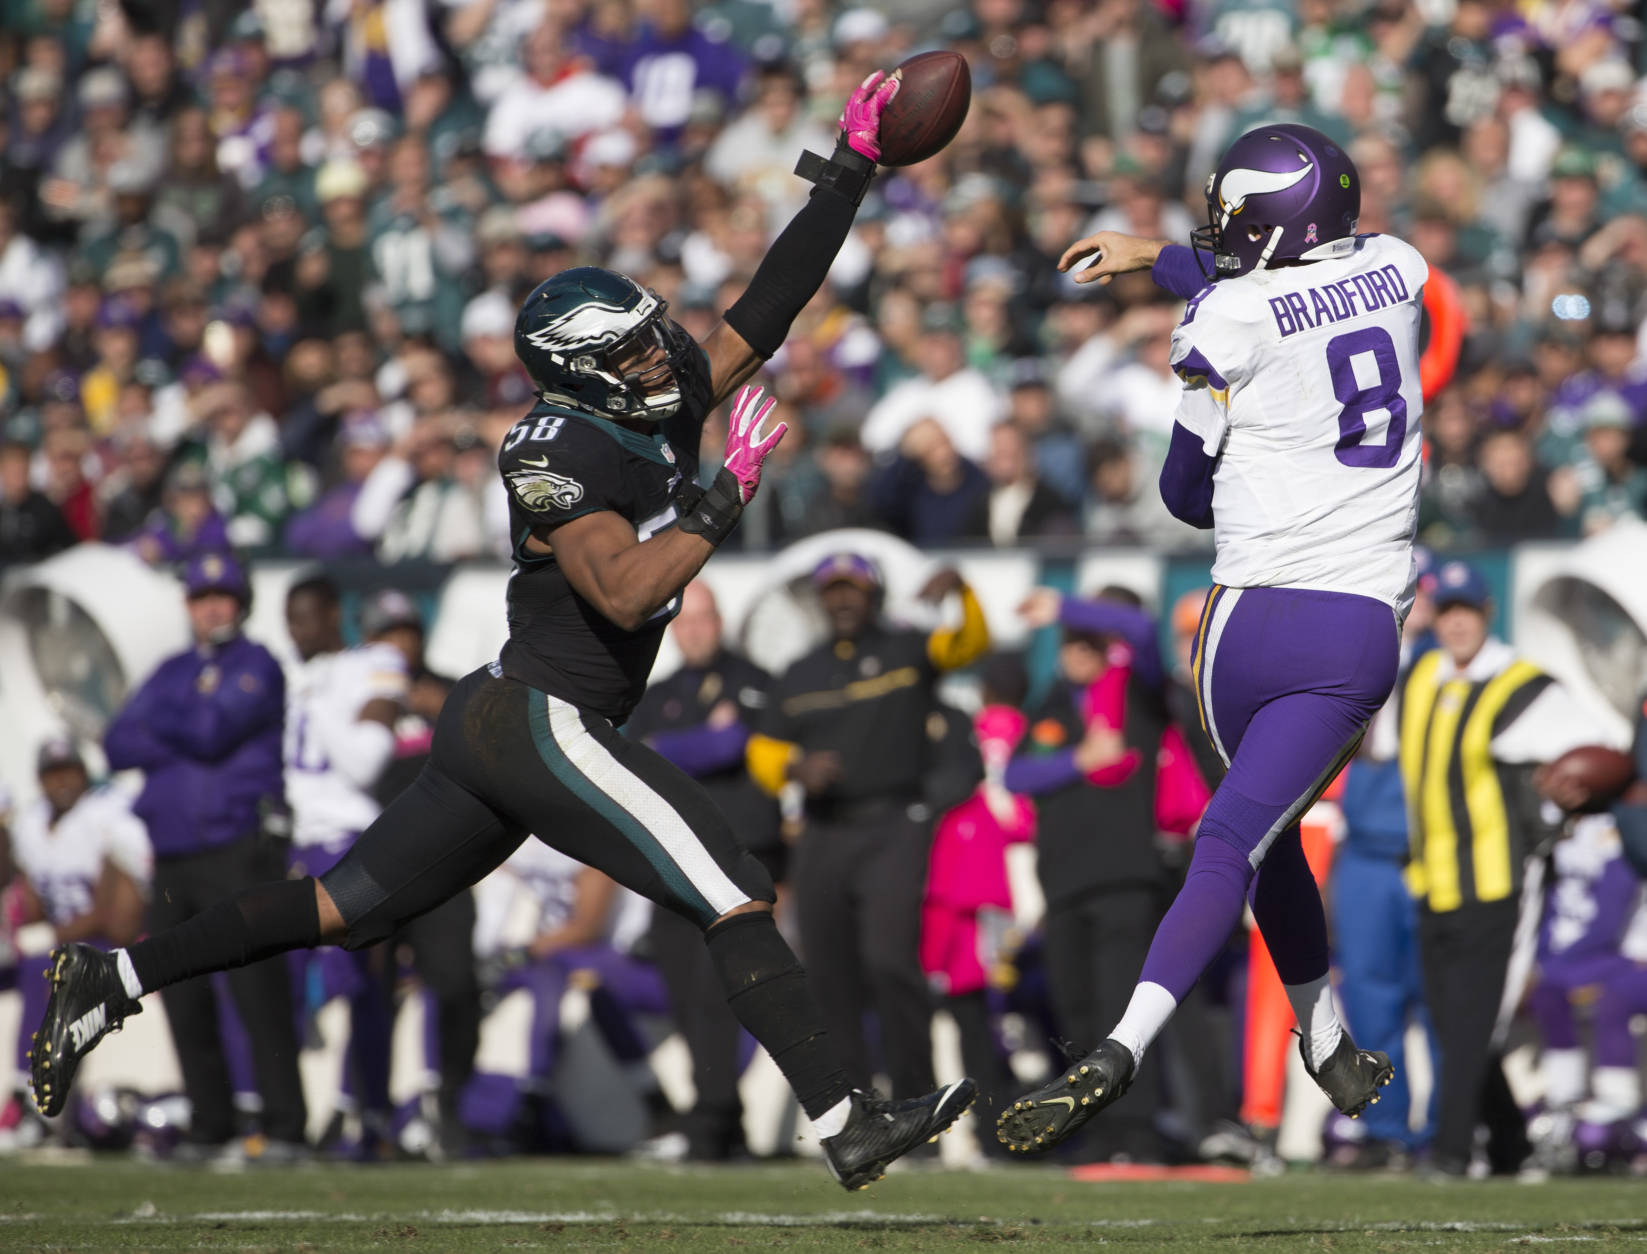 PHILADELPHIA, PA - OCTOBER 23: Jordan Hicks #58 of the Philadelphia Eagles knocks down a pass thrown by Sam Bradford #8 of the Minnesota Vikings in the third quarter at Lincoln Financial Field on October 23, 2016 in Philadelphia, Pennsylvania. The Eagles defeated the Vikings 21-10. (Photo by Mitchell Leff/Getty Images)